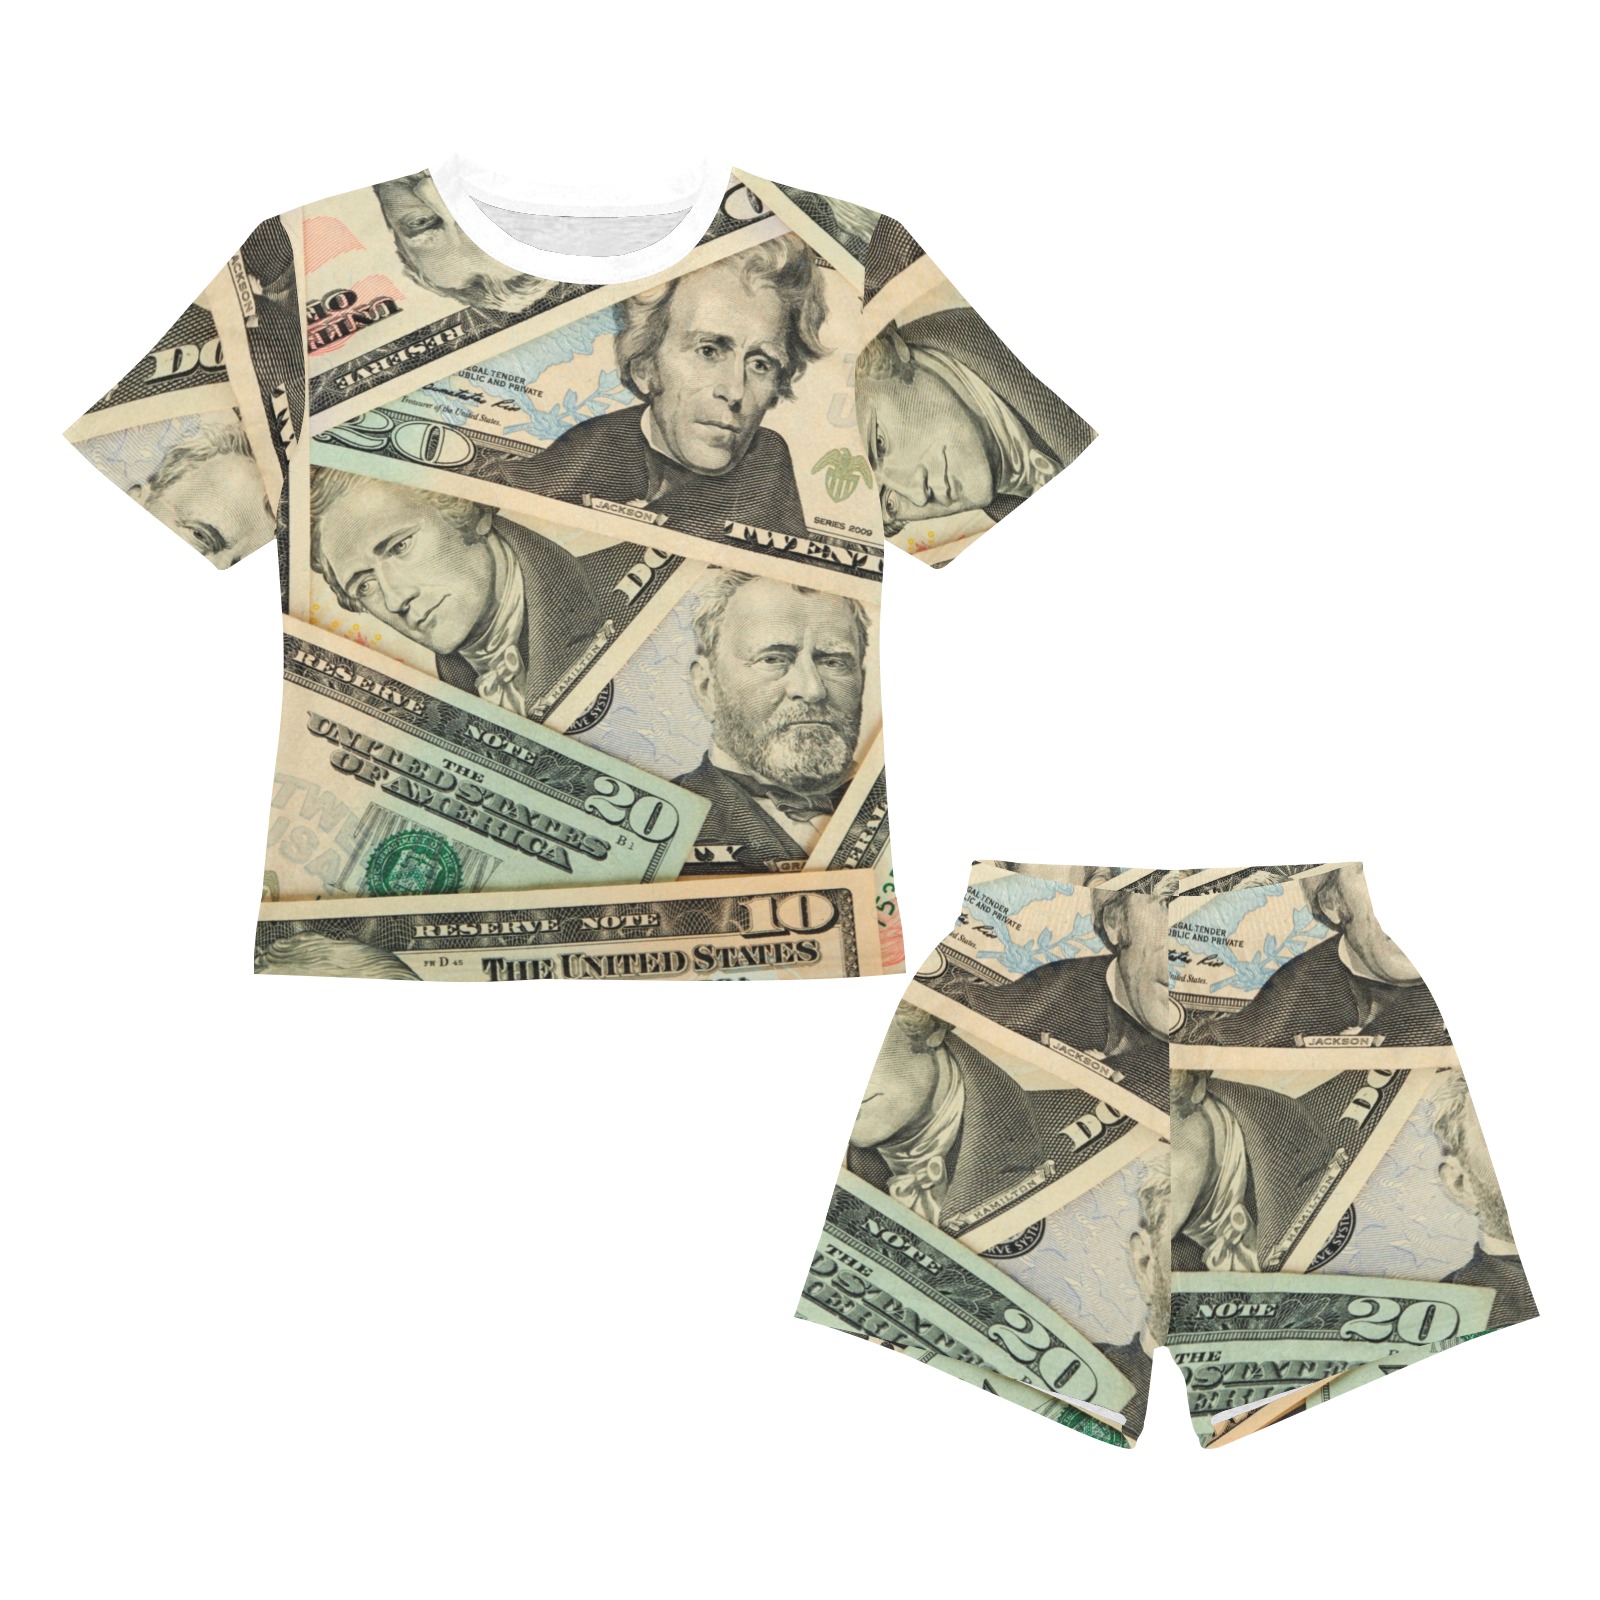 US PAPER CURRENCY Little Boys' Short Pajama Set